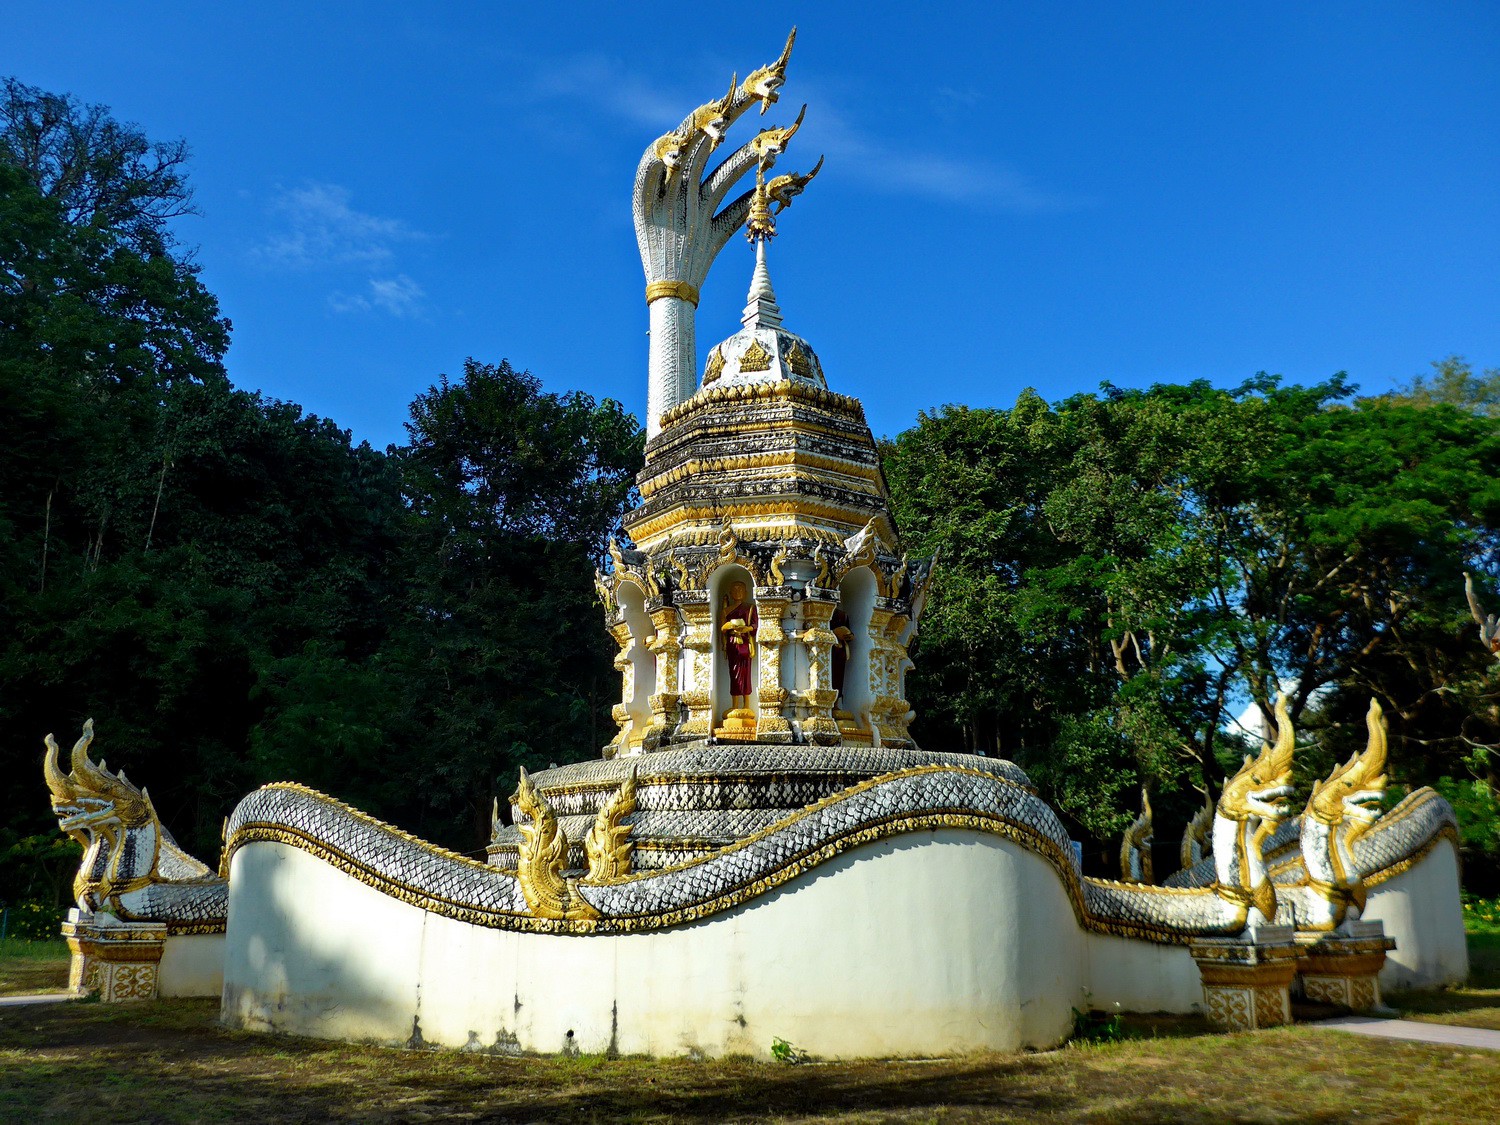 Another temple of the Wat Tham complex